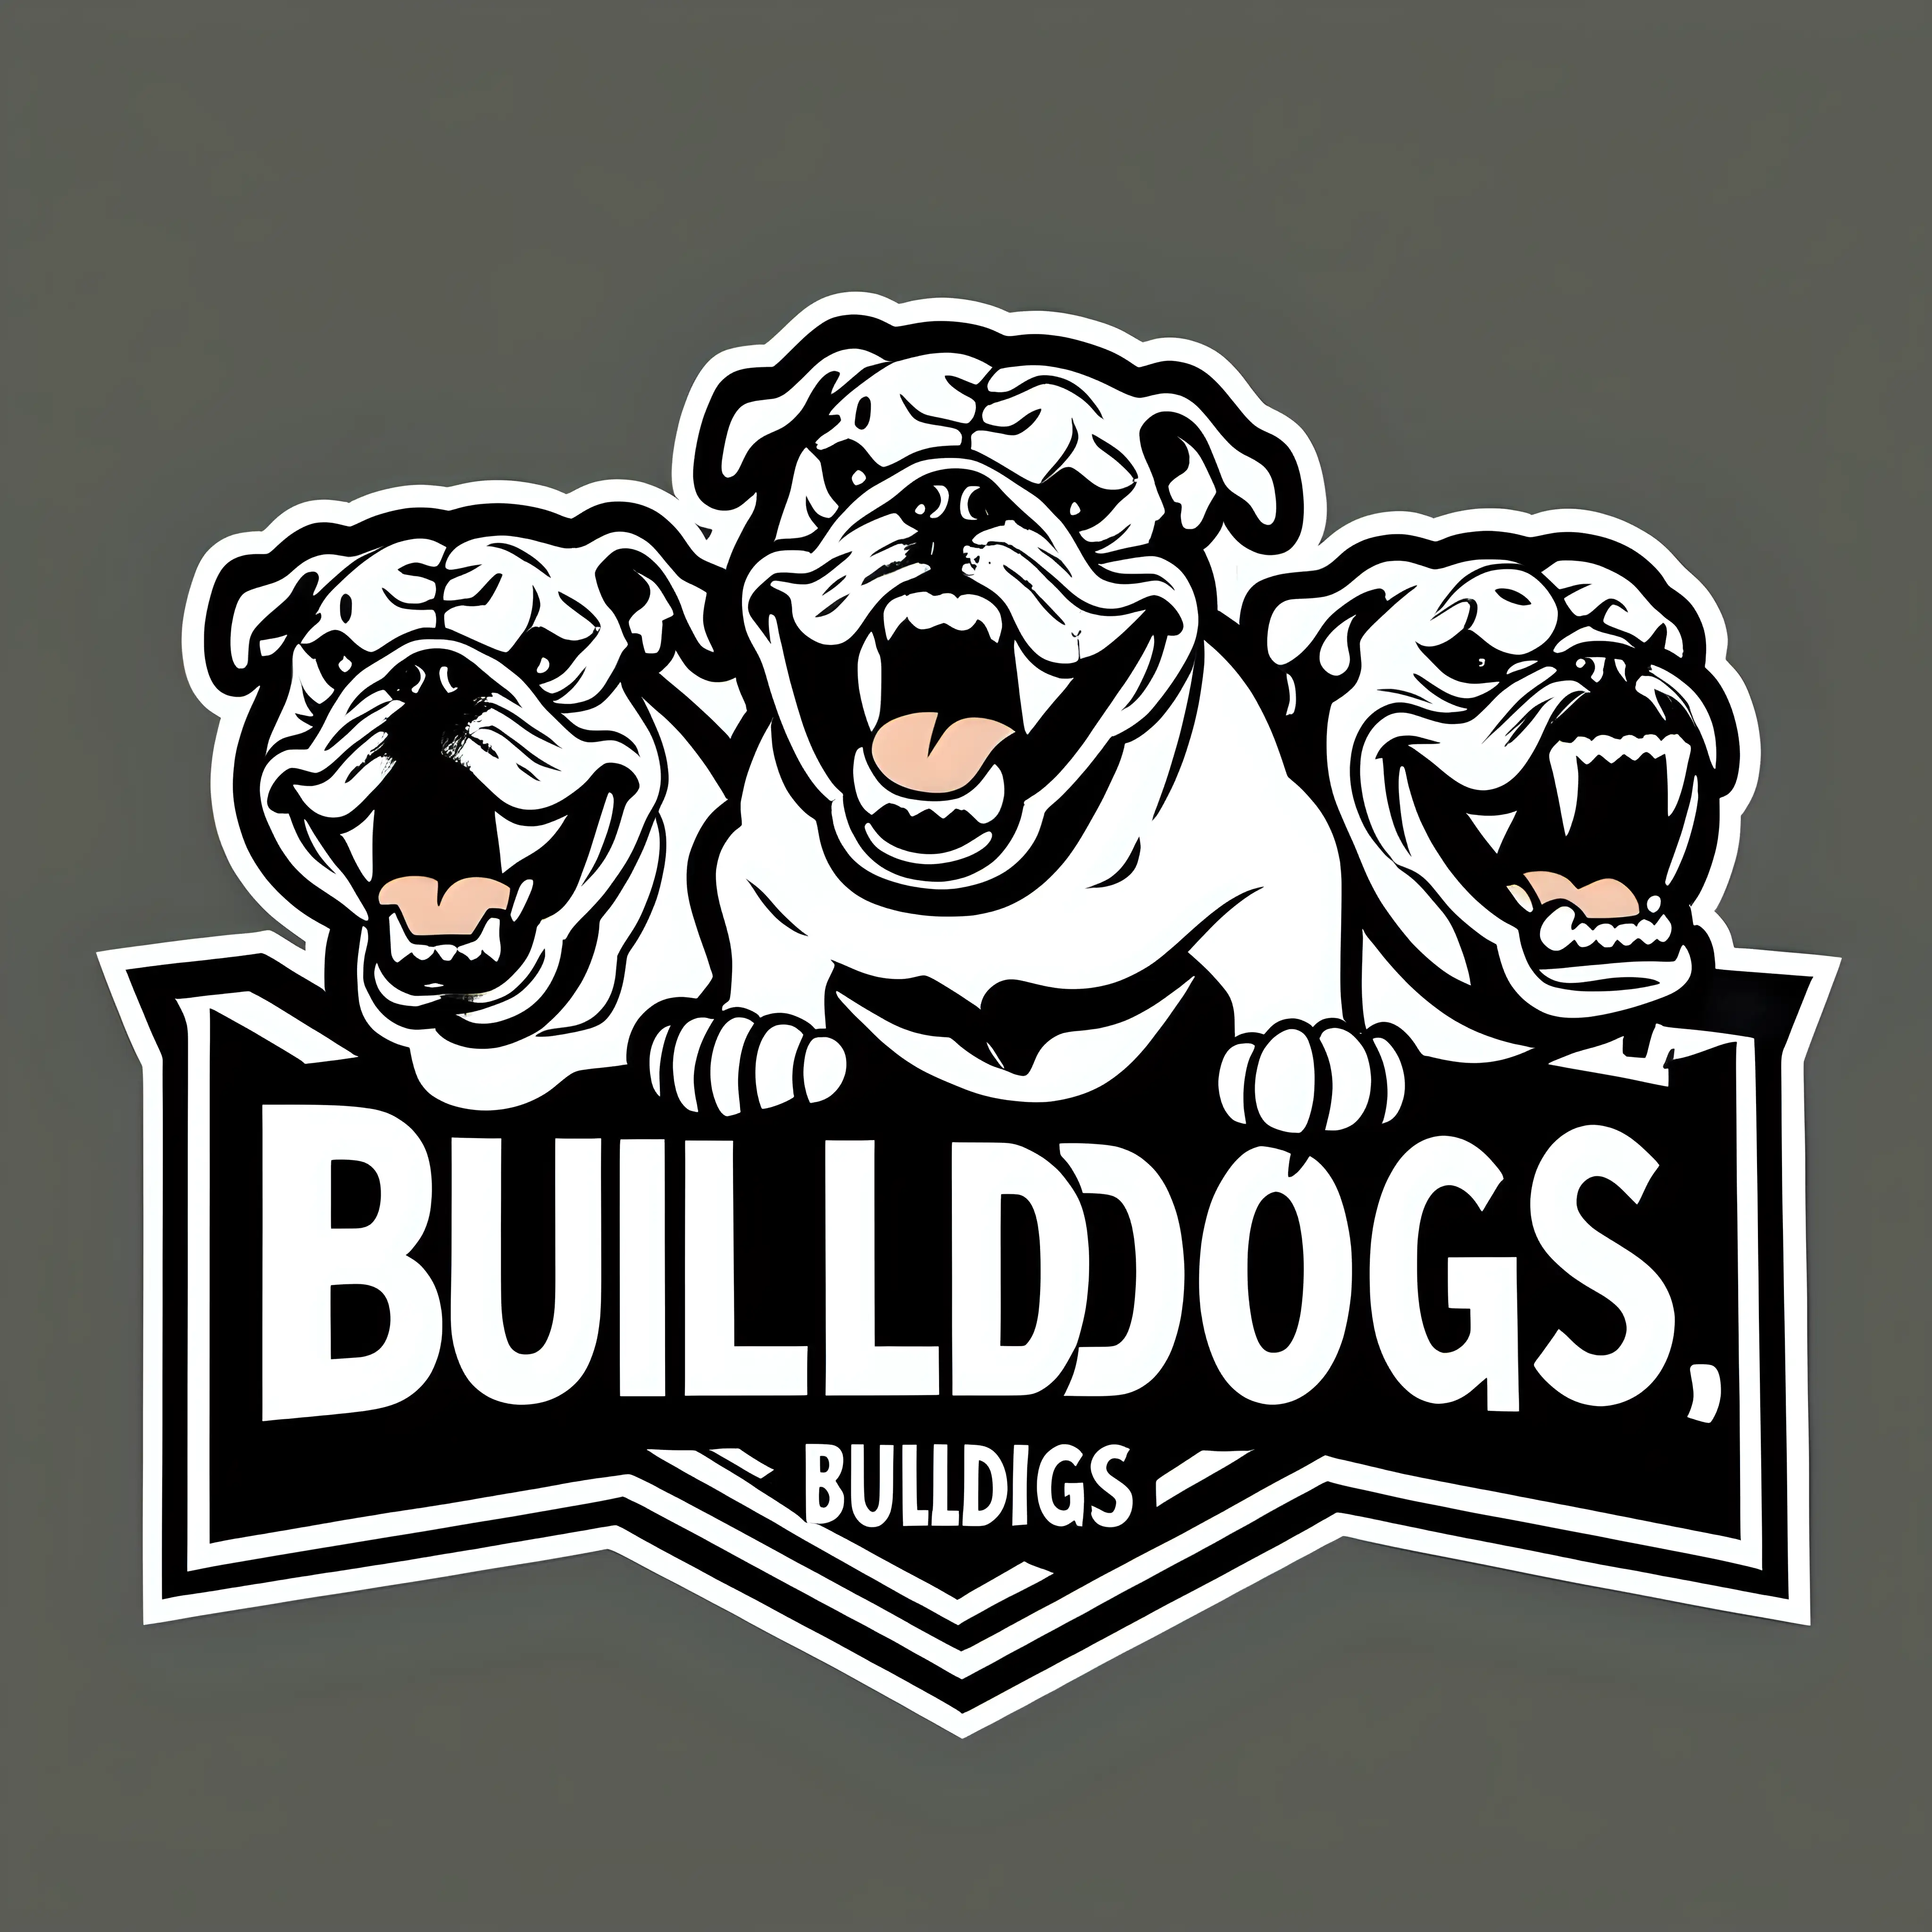 WE ARE BULLDOGS, DISTRESSED FONT, BLACK, GROWLING TEETH, NO BACKGROUND